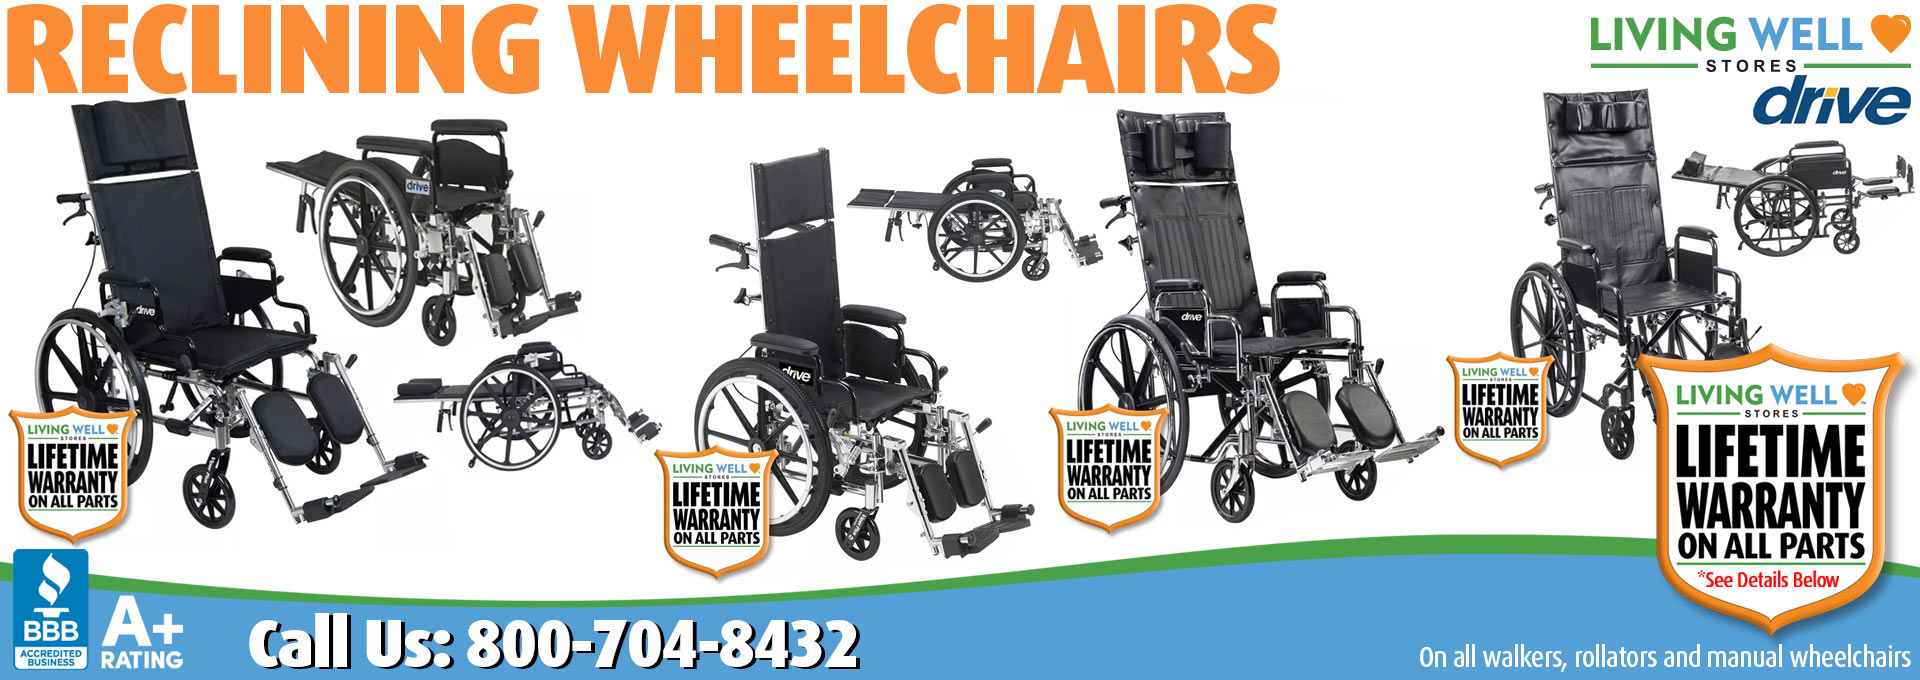 Living Well Stores: Featuring the best selection of Walking Assist and Reclining Wheelchair Products for Sale